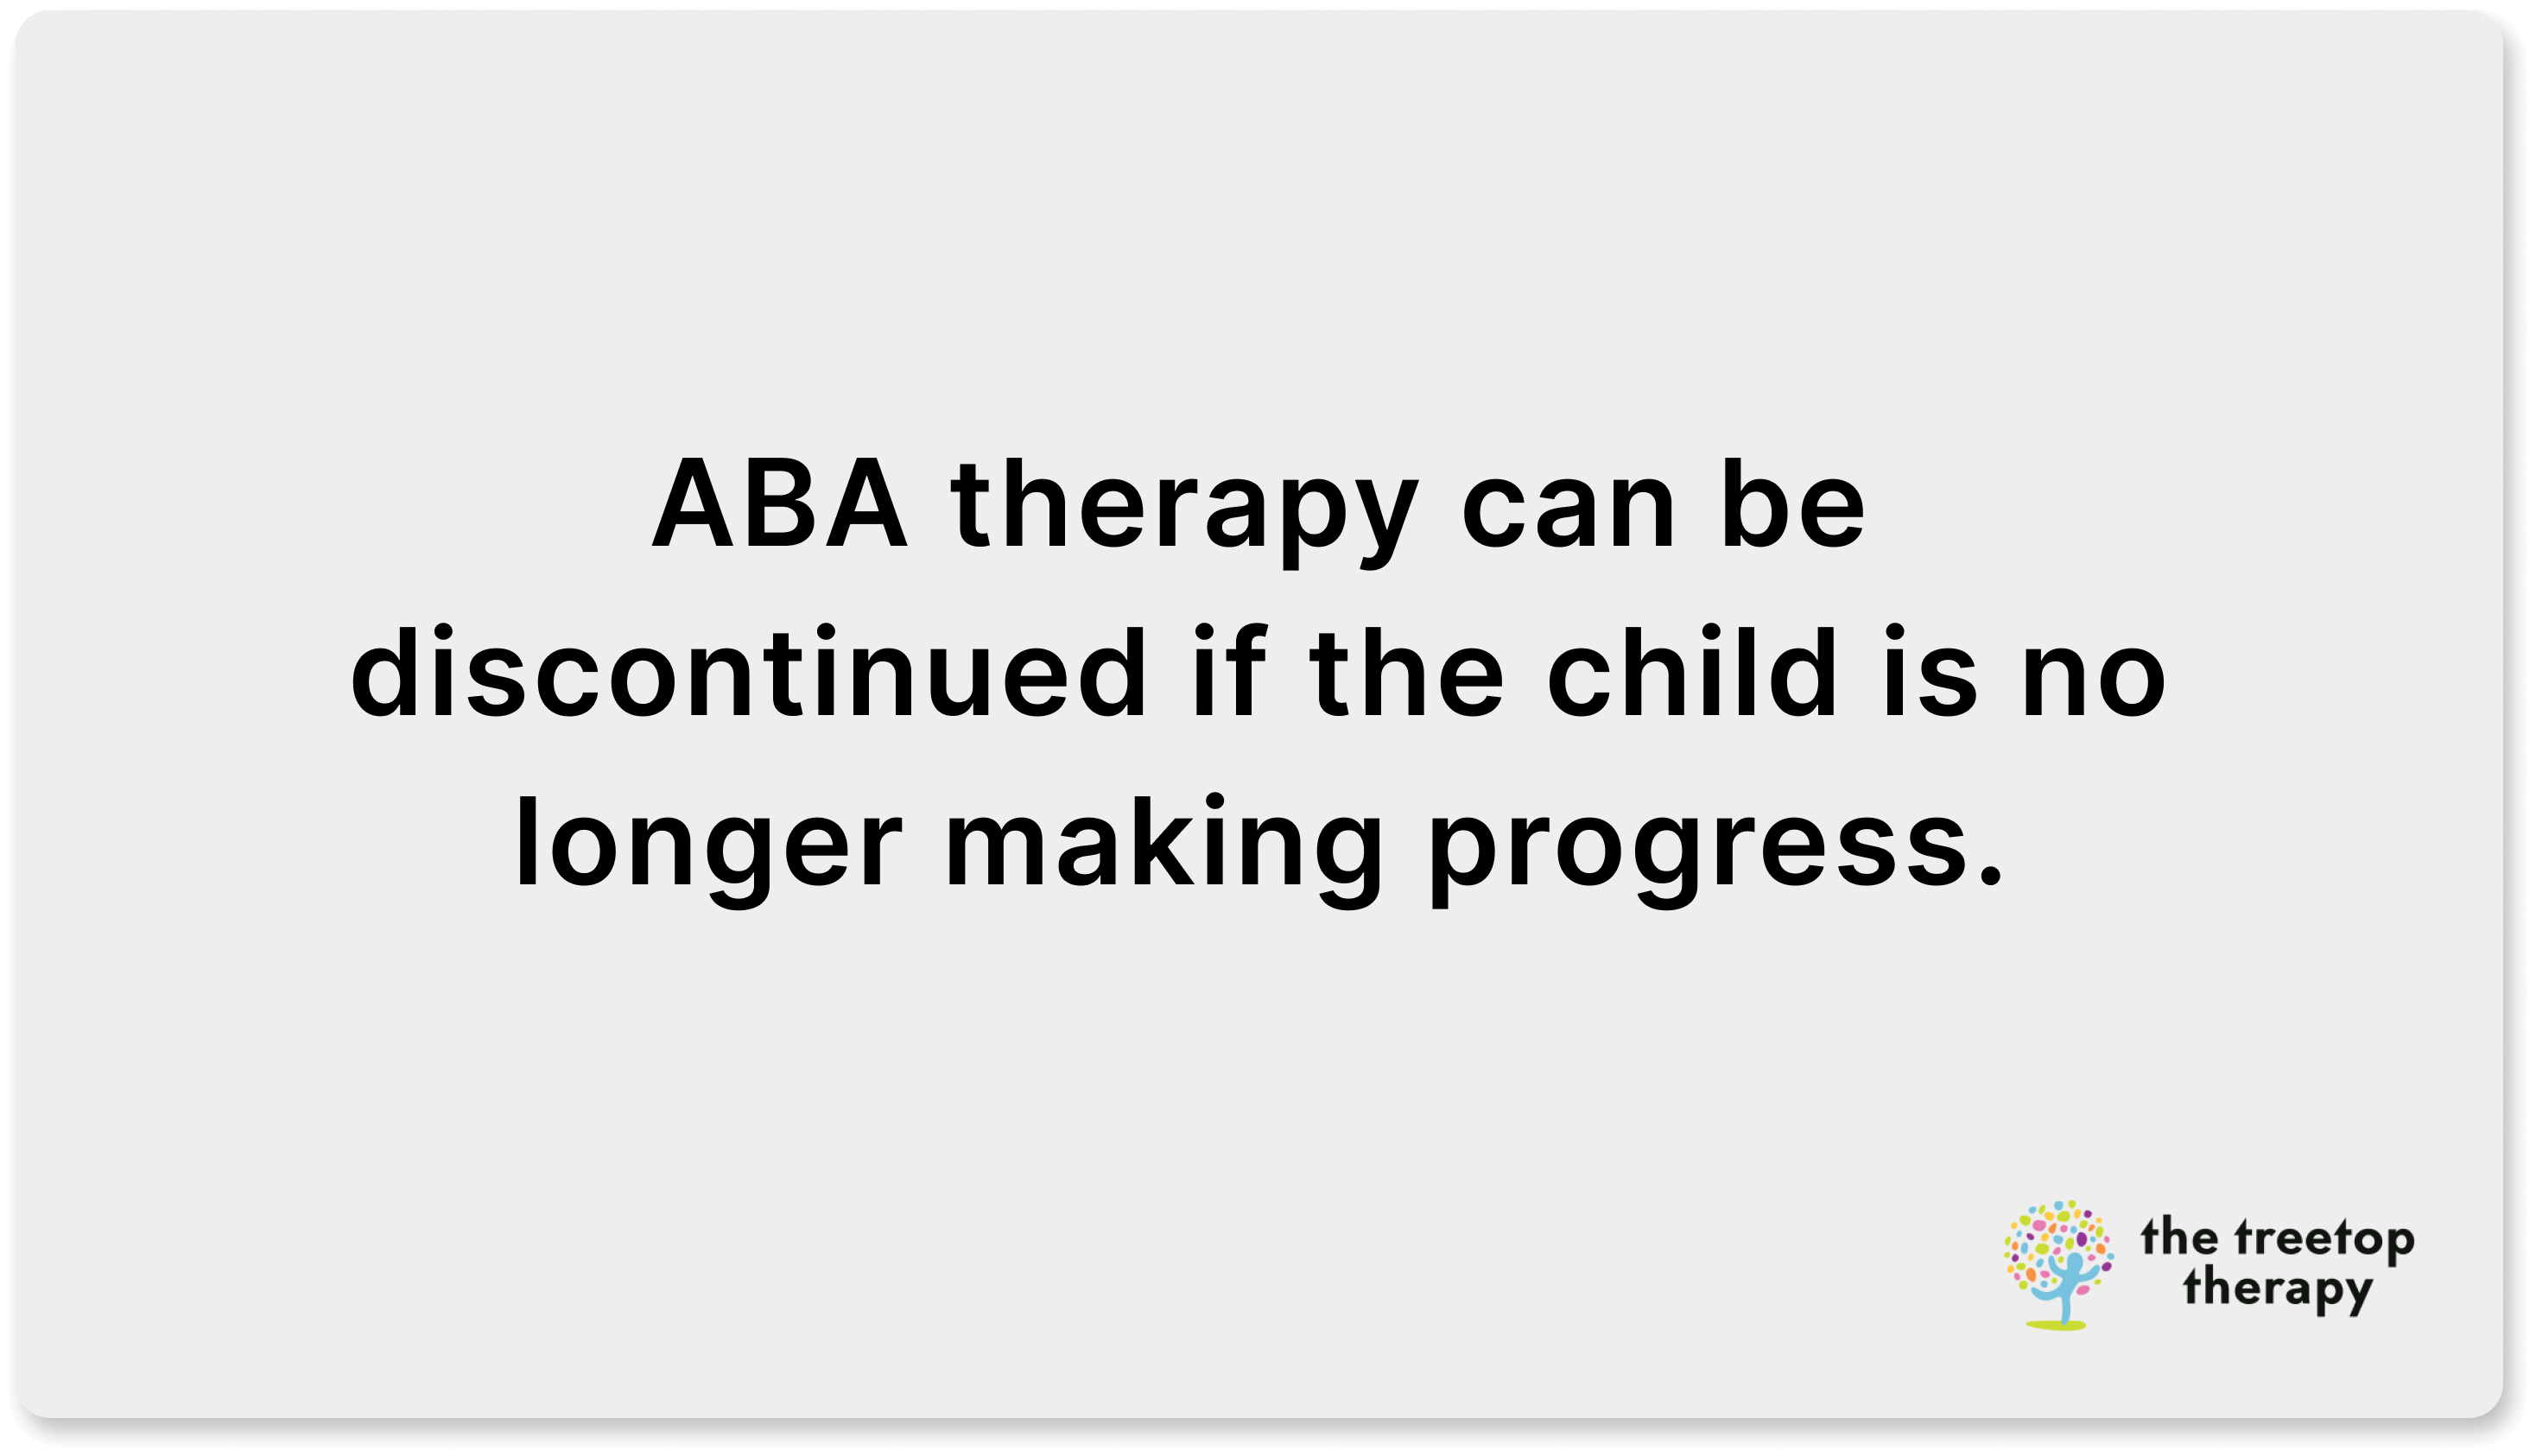 when to pause aba therapy